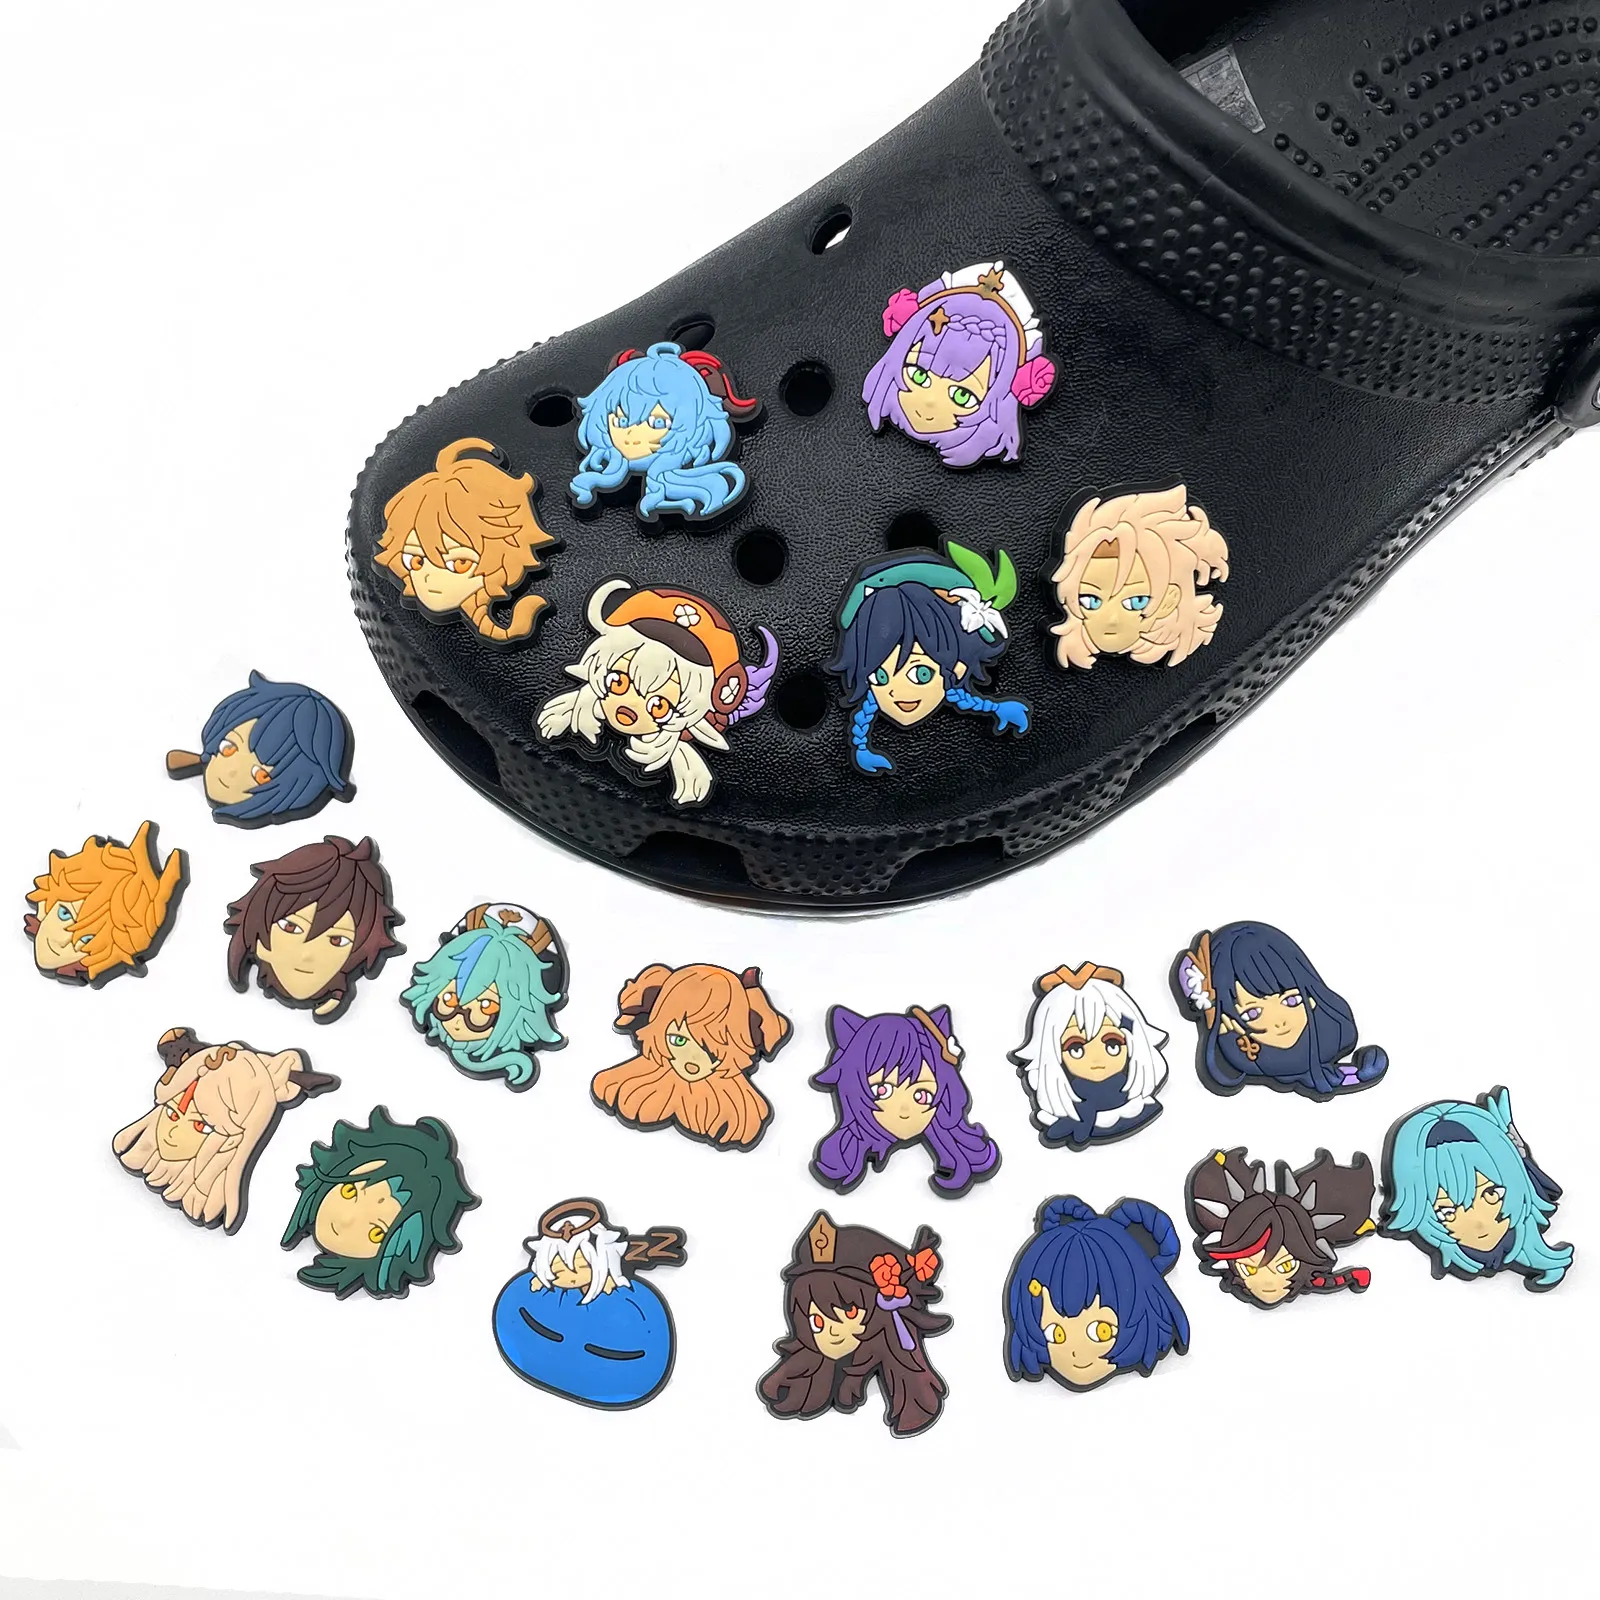 Pvc Anime Shoe Parts Accessories Decoration Charm Buckle Jibitz For Croc  Charms Cartoon Clog Buttons From Lightingtop, $0.17